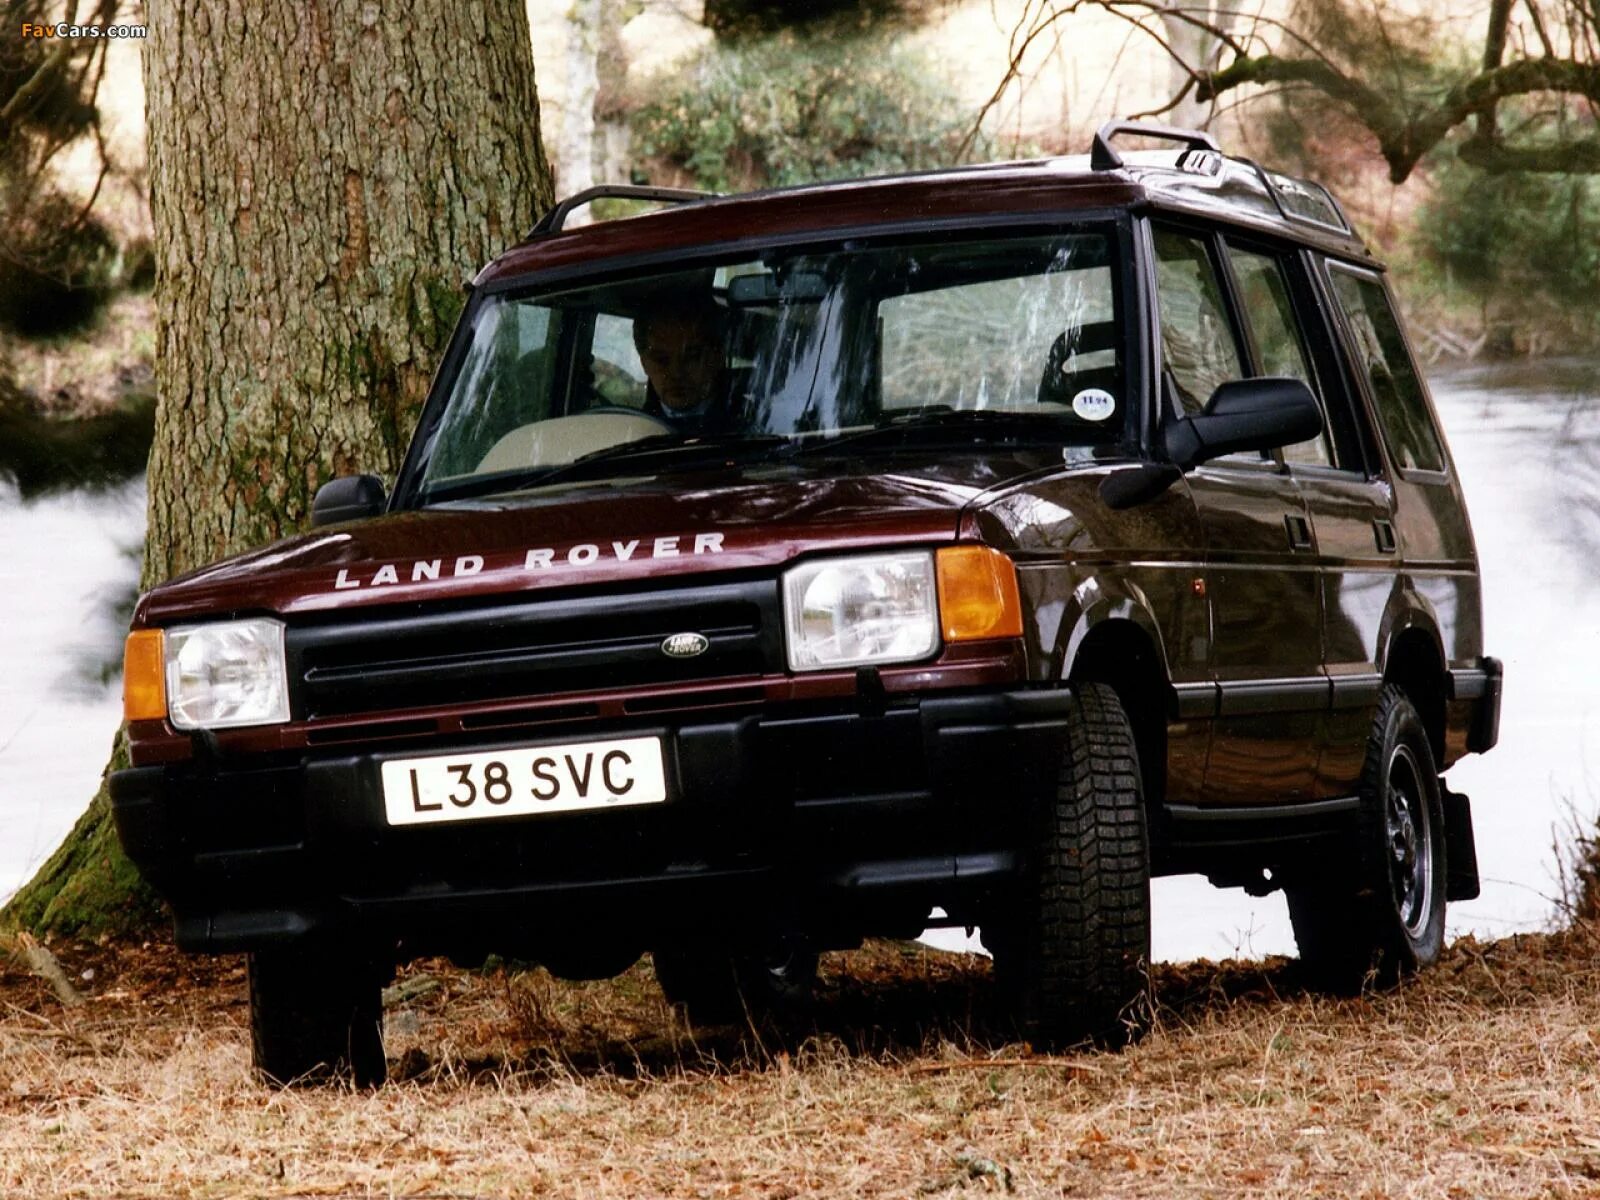 Land Rover Discovery 1. Ленд Ровер Дискавери 1994. Range Rover Discovery 1. Ленд Ровер Дискавери 1990. Дискавери 10